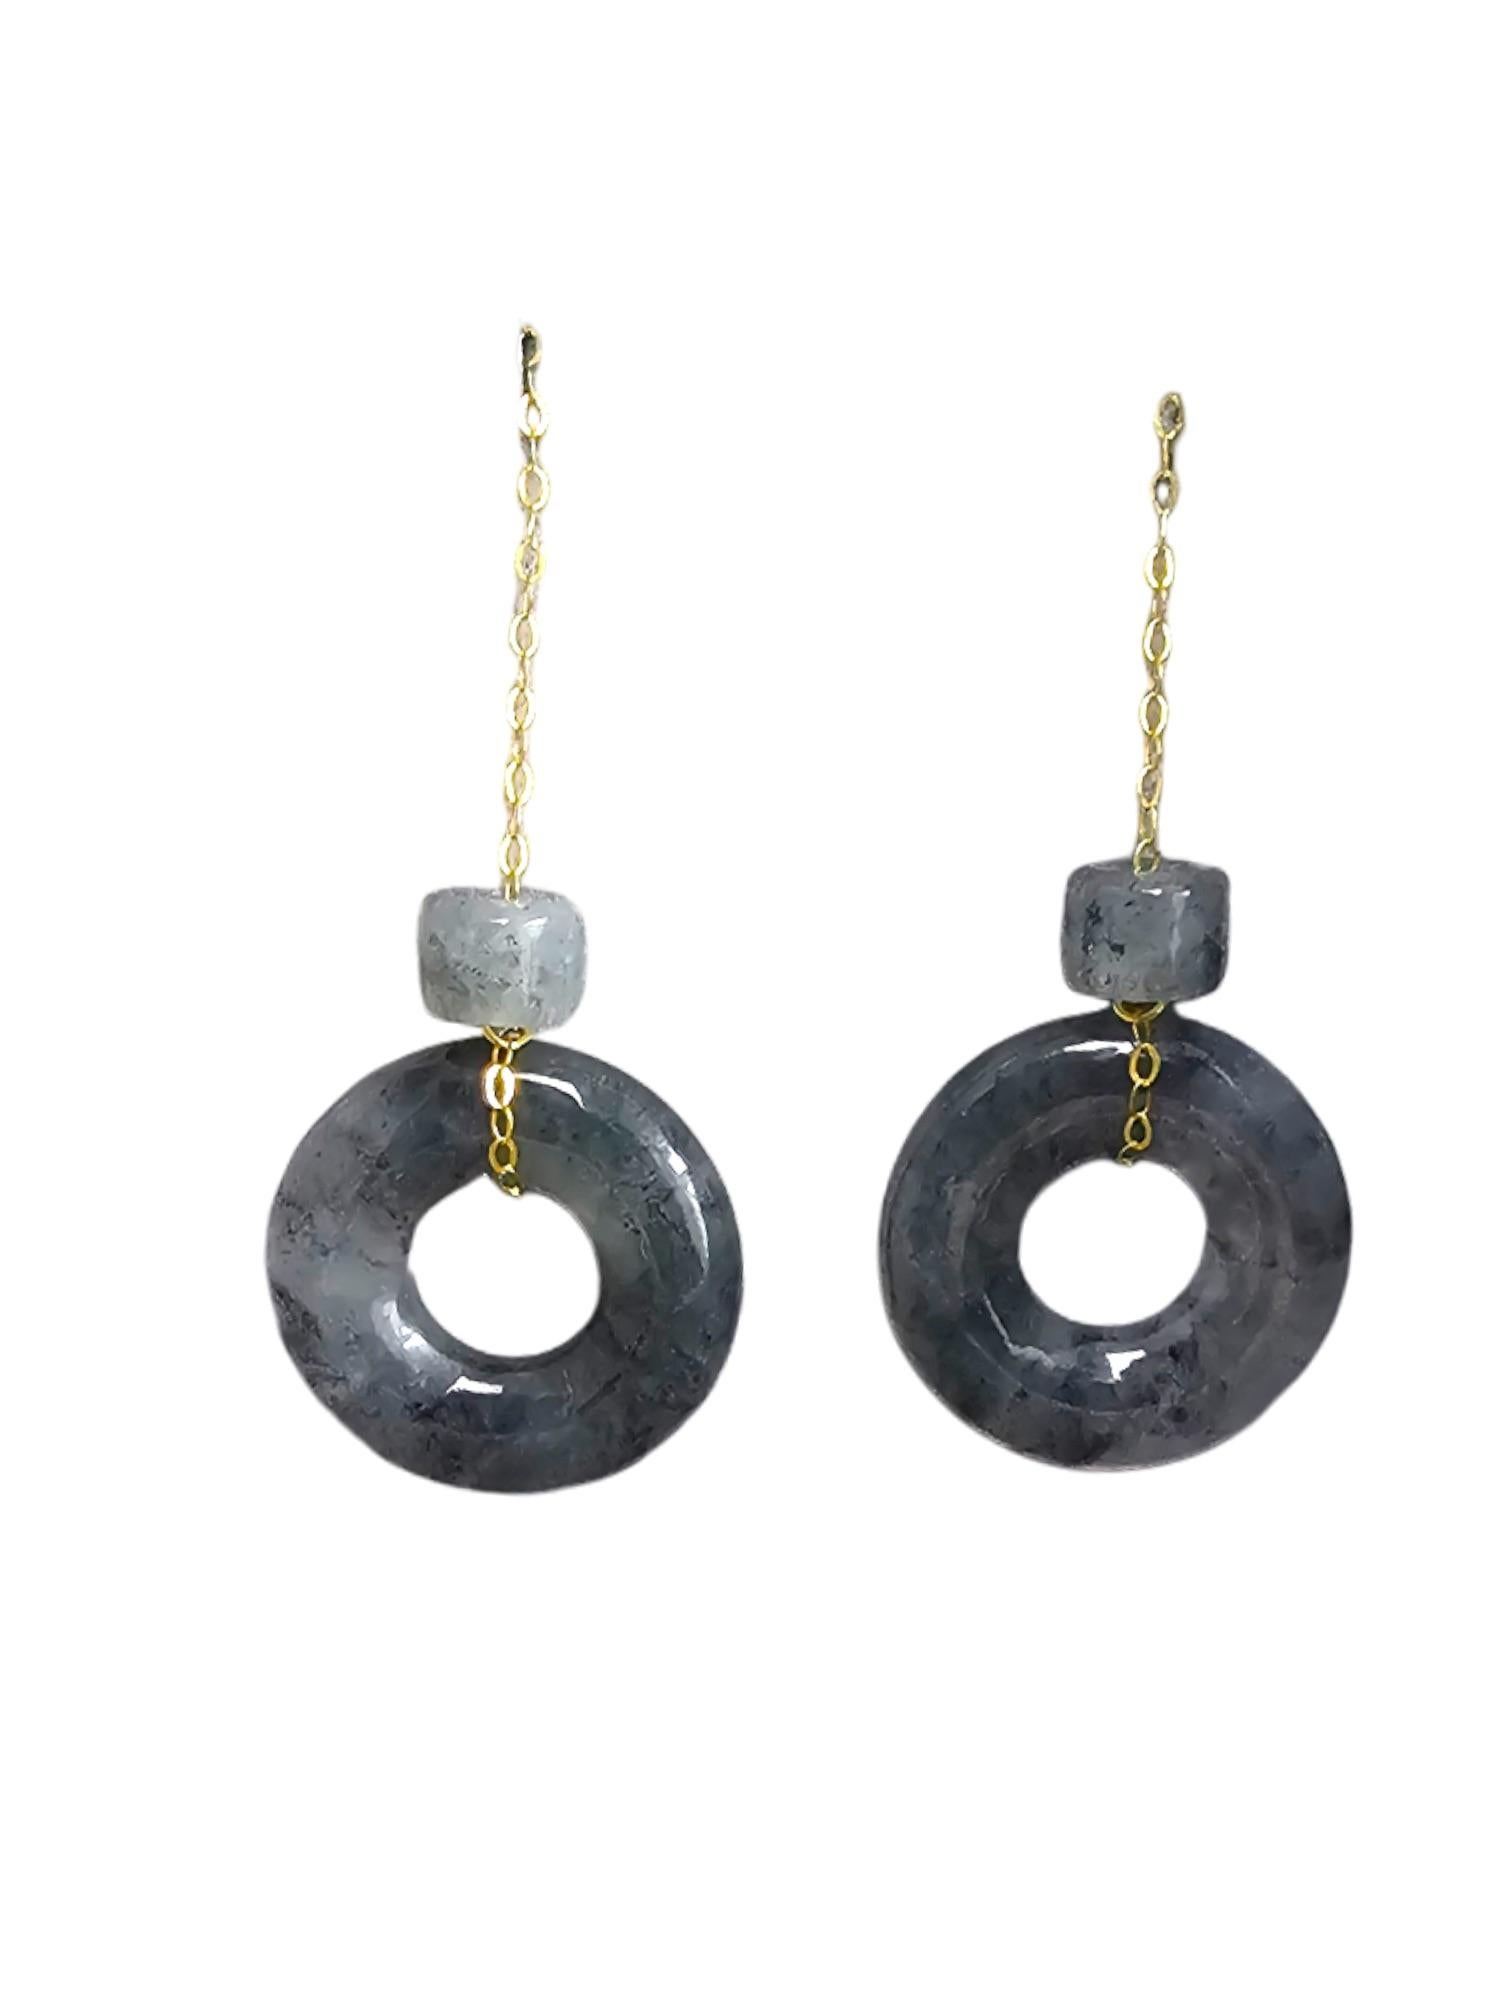 Drop and Dangle Black A-Jade Jadeite Disc Donut Earrings With 18K Solid Yellow Gold Chains

These Earrings were designed and hand carved by our expert artisans in our Hong Kong workshop. We use 18K Yellow Gold Chains to bring out the best in the